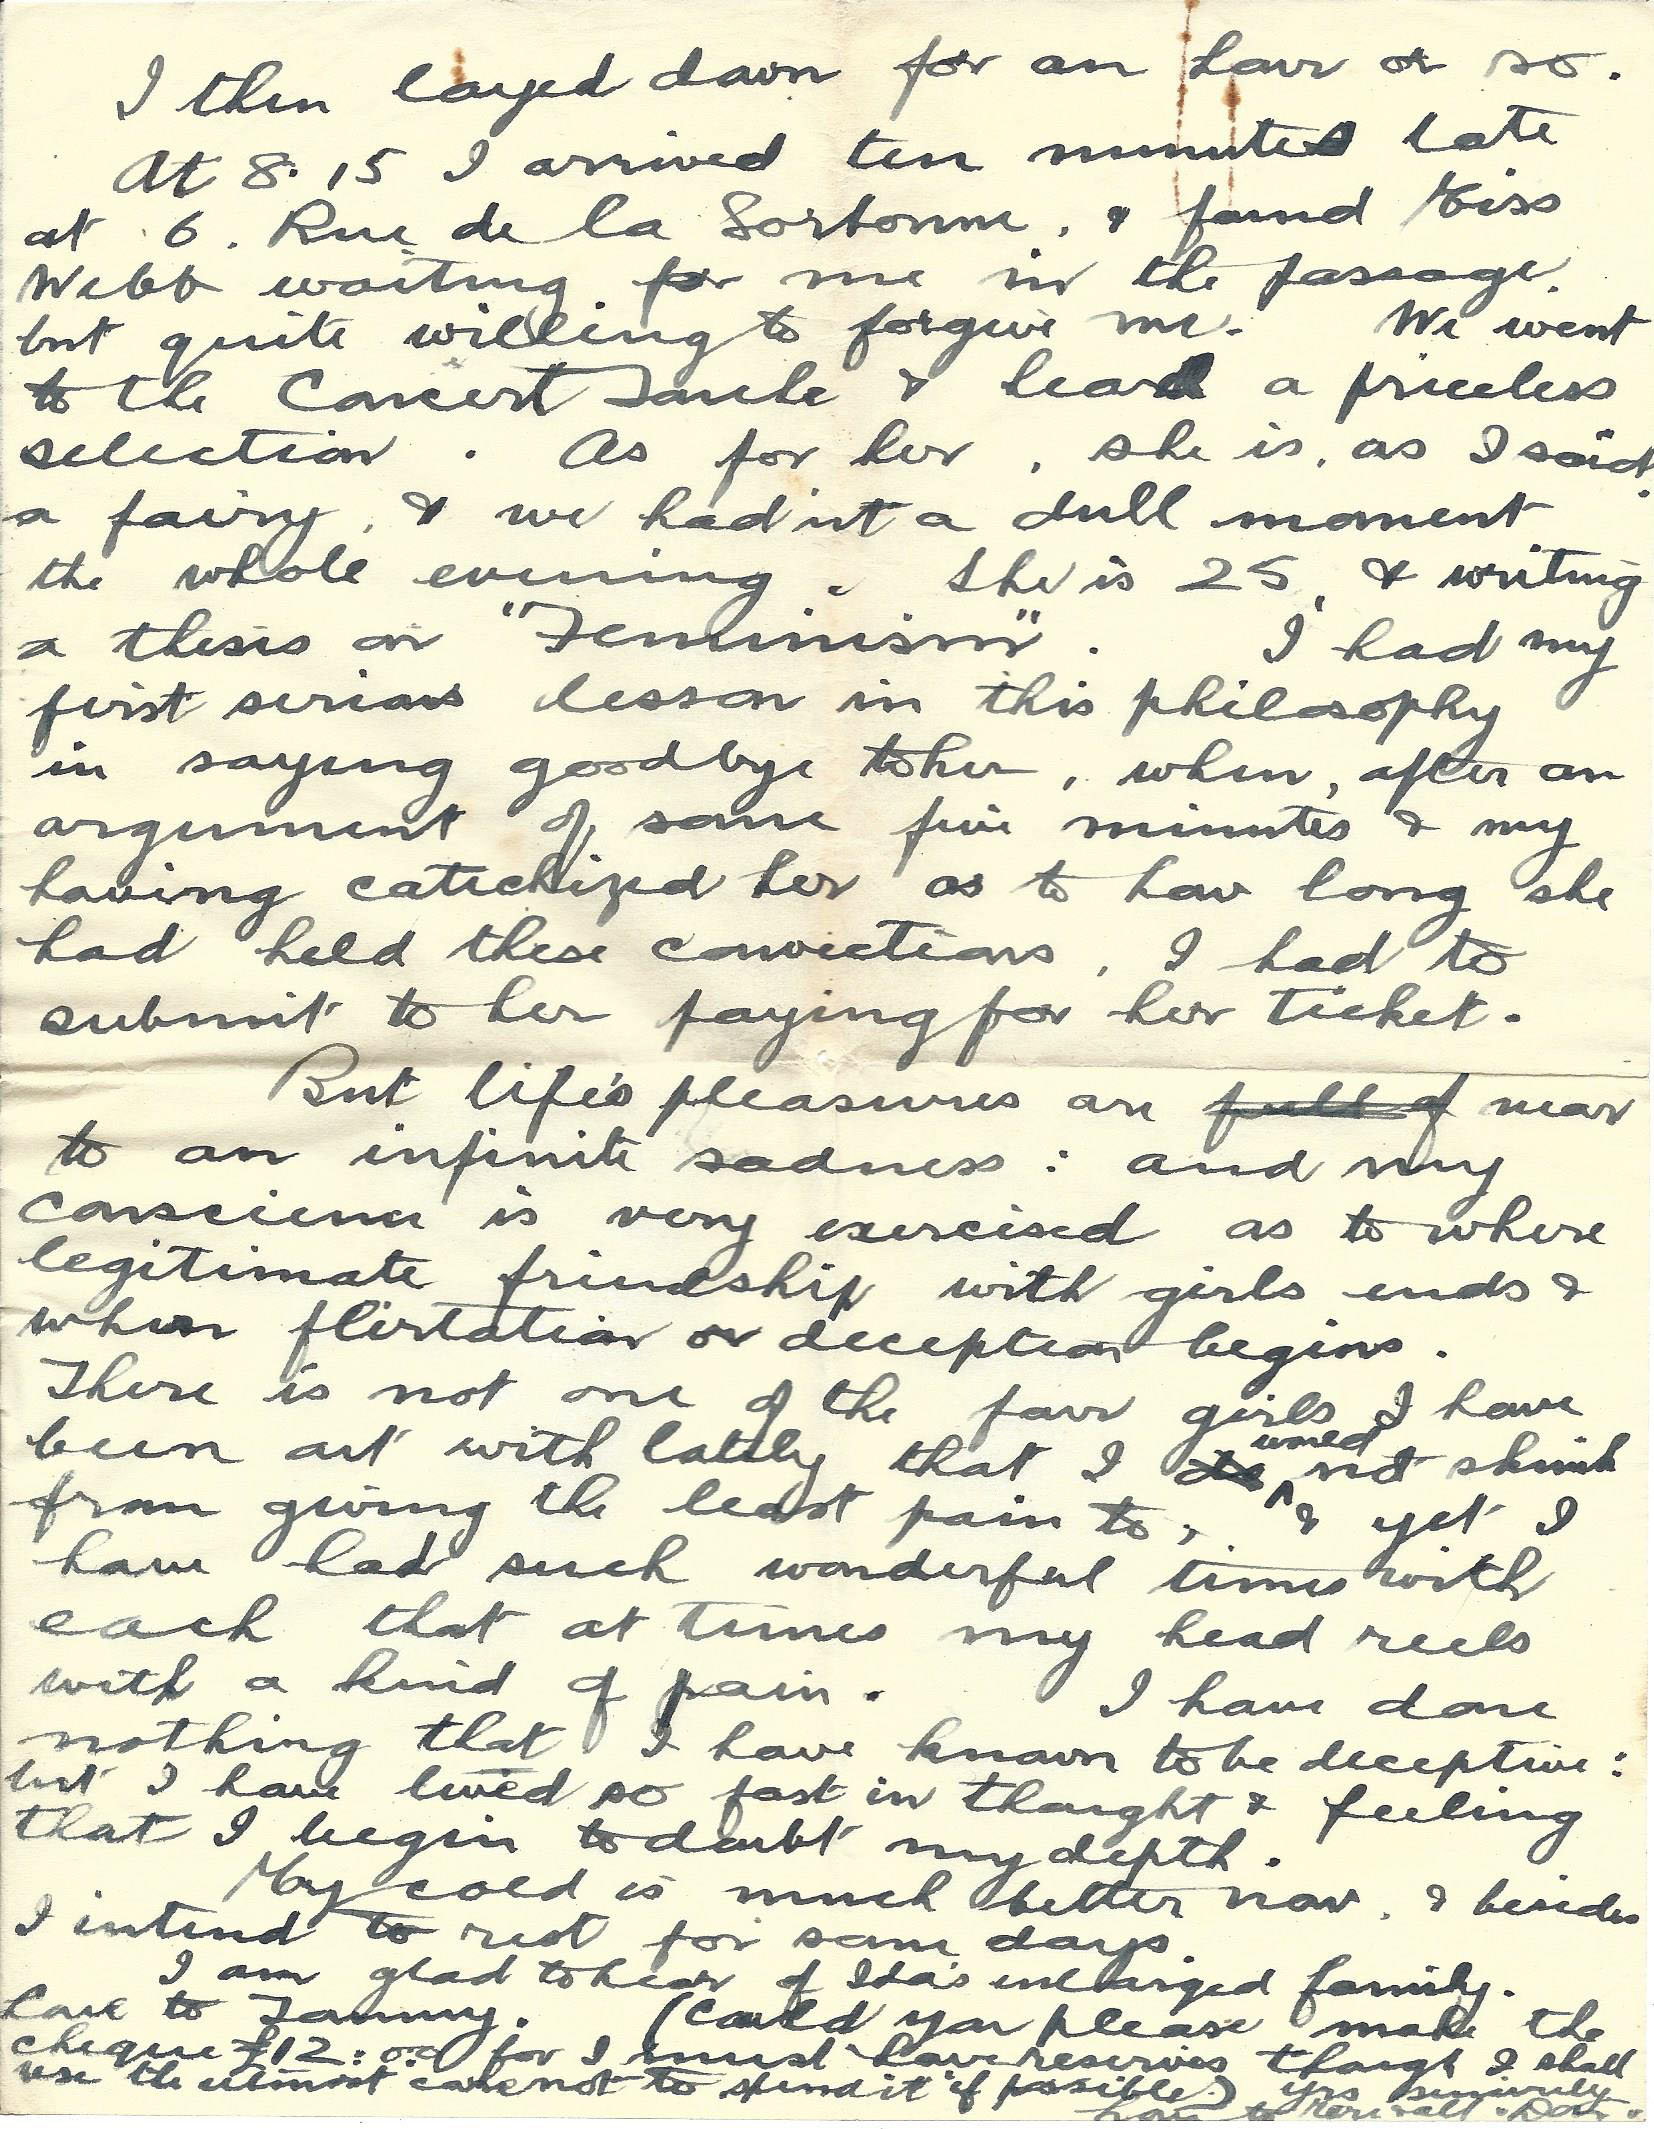 1920-02-28 p4 Donald Bearman letter to his father